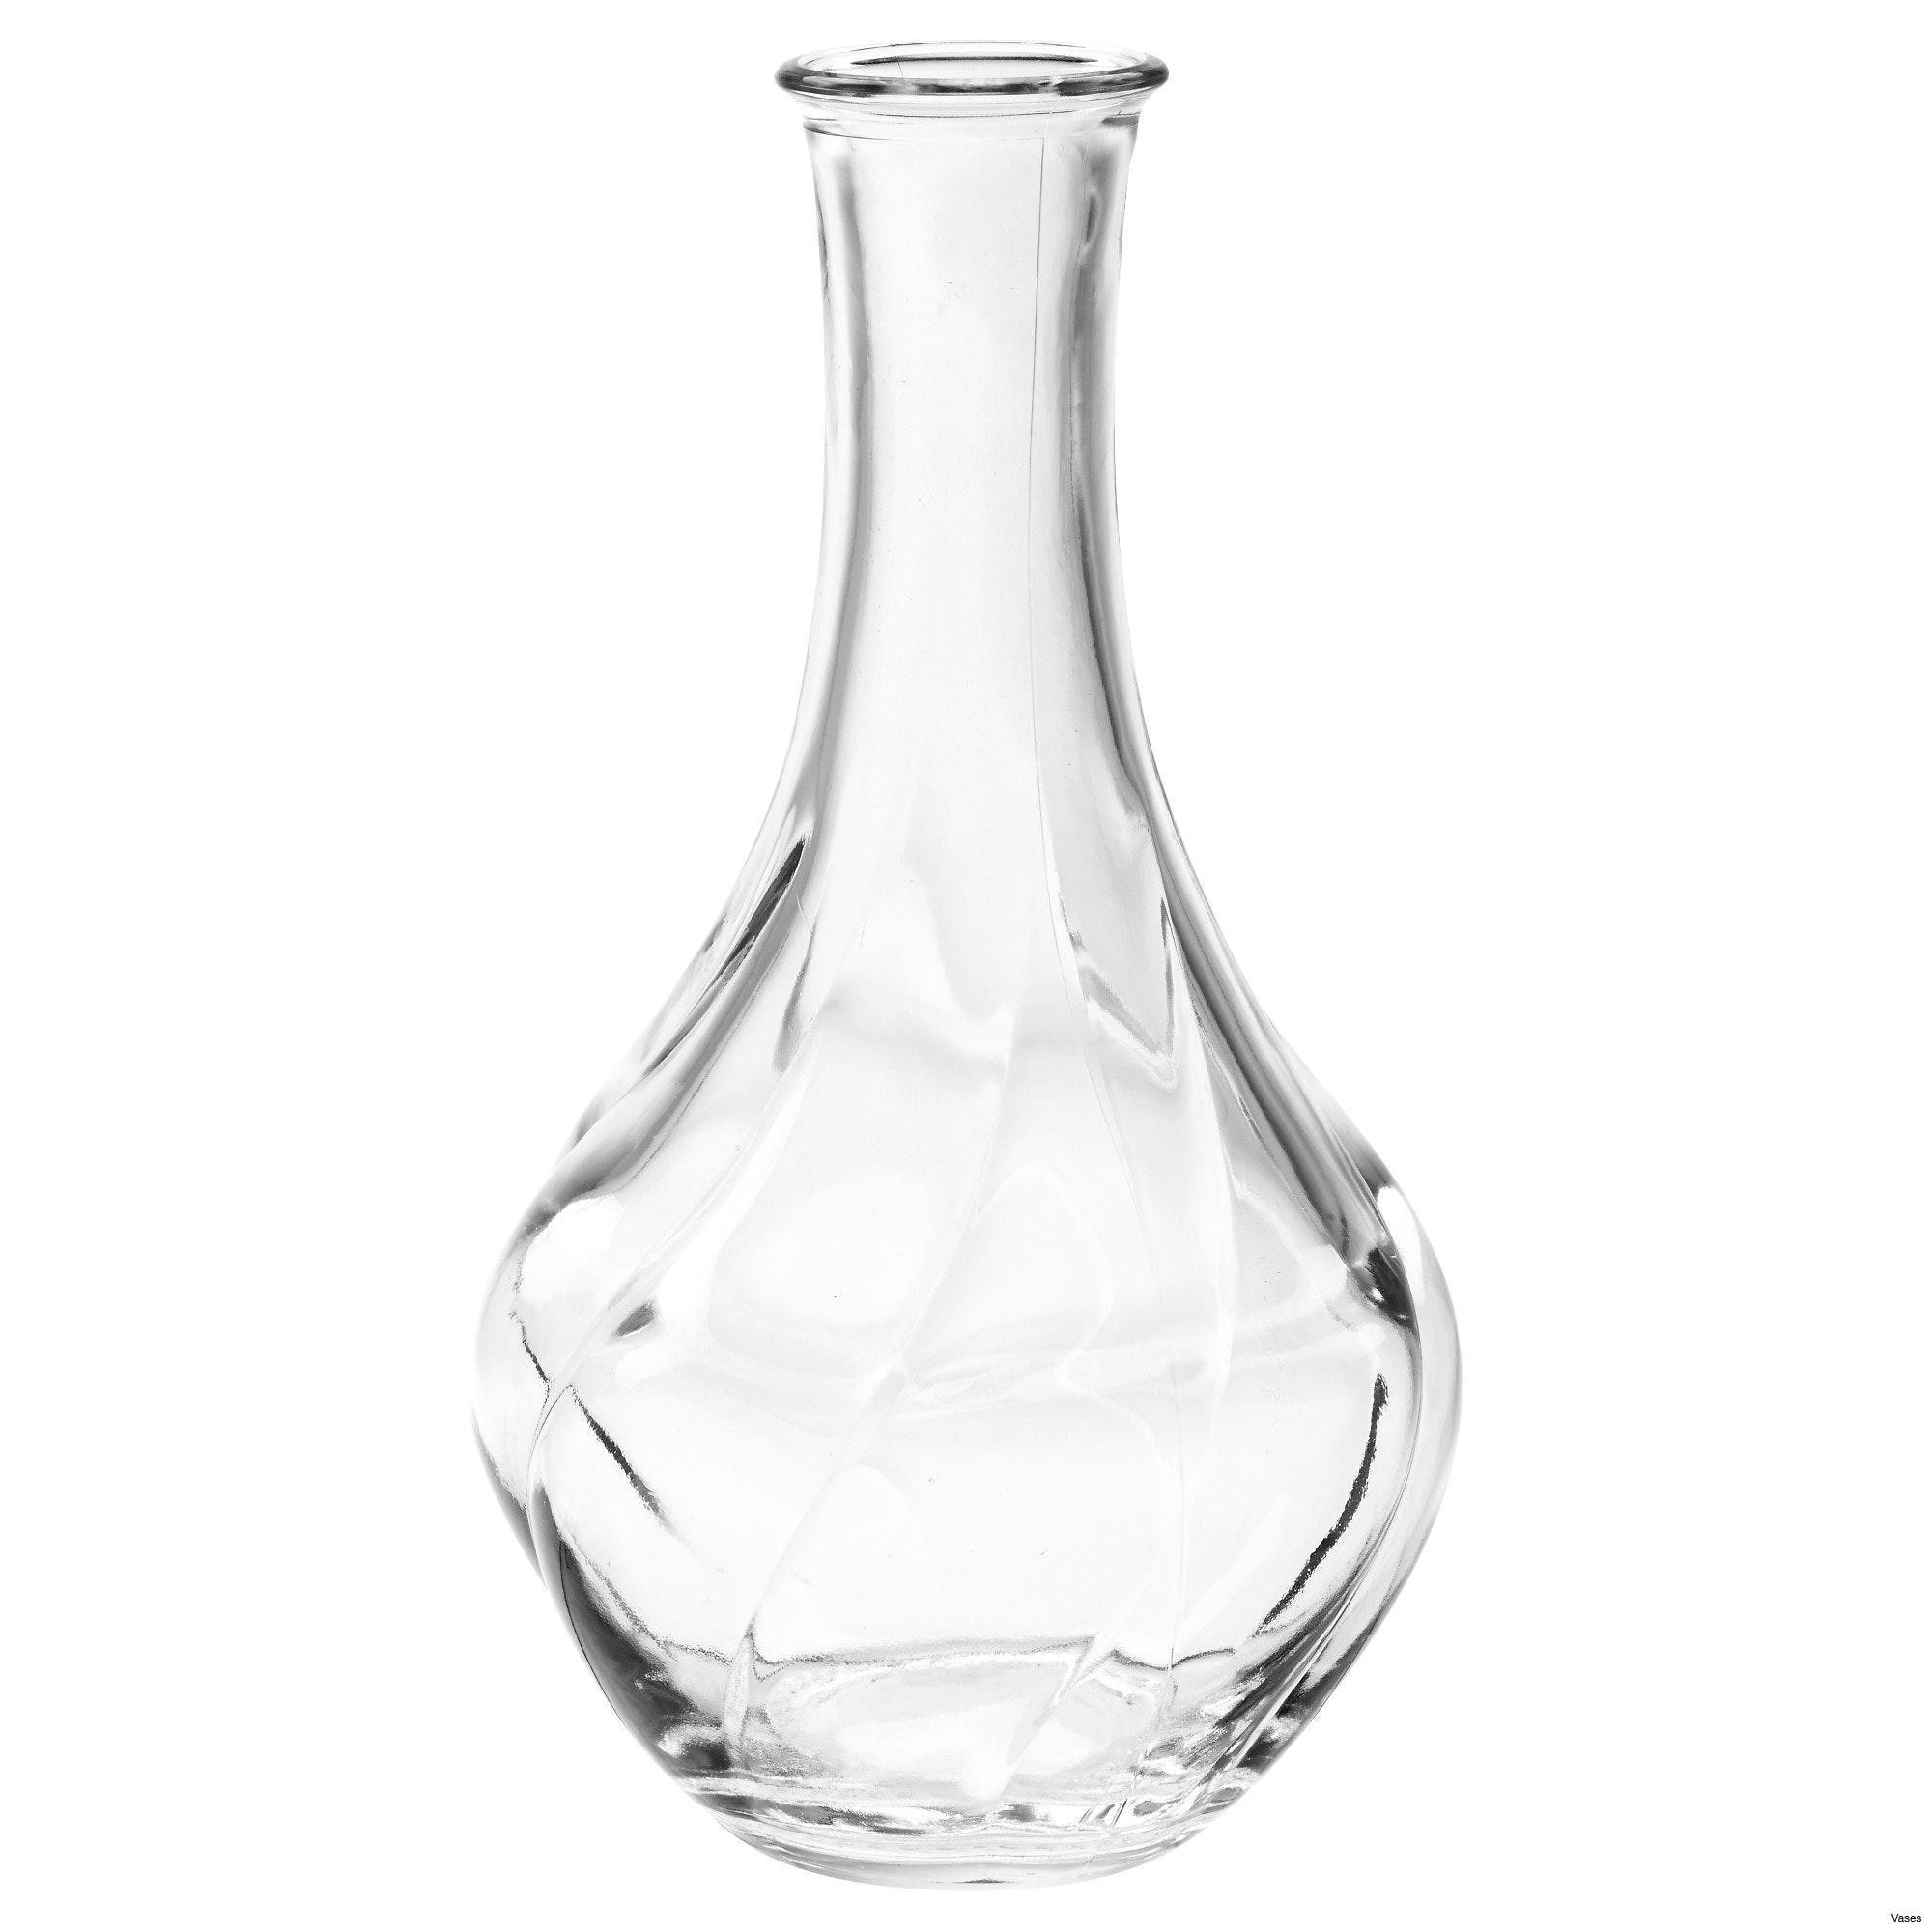 Tall Clear Vases Of 11 Beautiful Clear Tall Glass Vases Bogekompresorturkiye Com for Living Room Glass Vases Fresh Clear Vase 0d Tags Amazing and Also White Interior Pattern